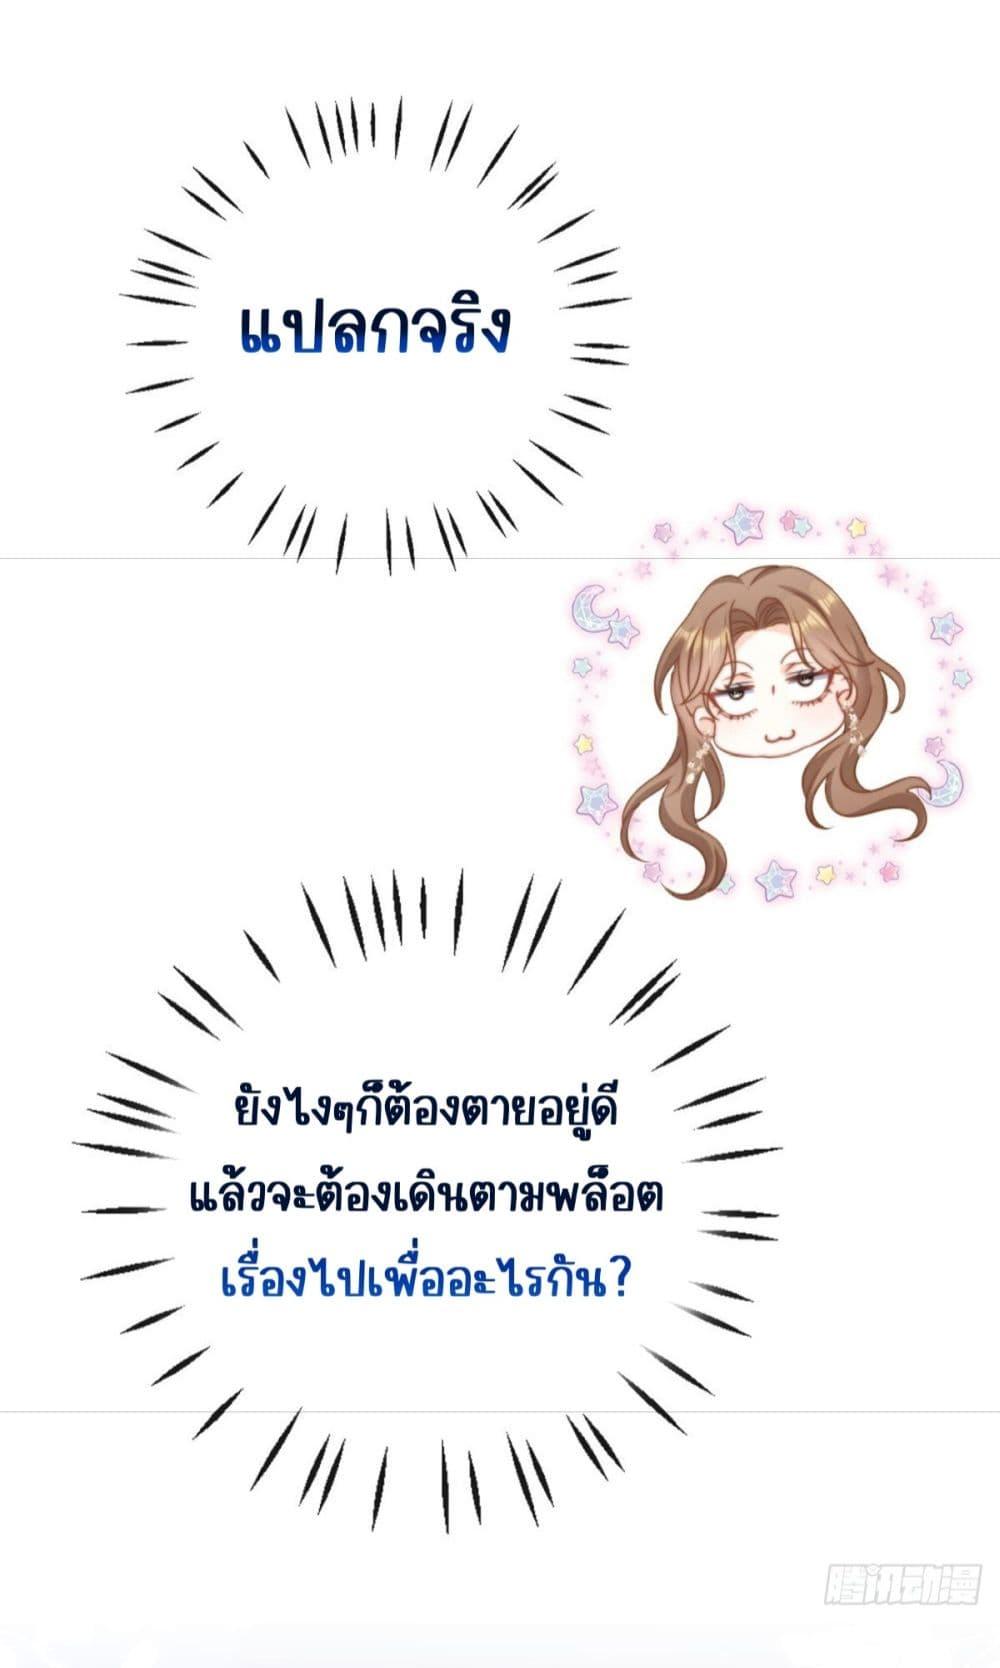 Goxuewen Female Supporting Role She Quit โ€“ เธเธญเธเธฐเธ—เธตเธเธฑเธเธเธ—เธขเธฑเธขเธ•เธฑเธงเธฃเนเธฒเธขเนเธเธเธดเธขเธฒเธขเธเนเธณเน€เธเนเธฒ เธ•เธญเธเธ—เธตเน 3 (4)